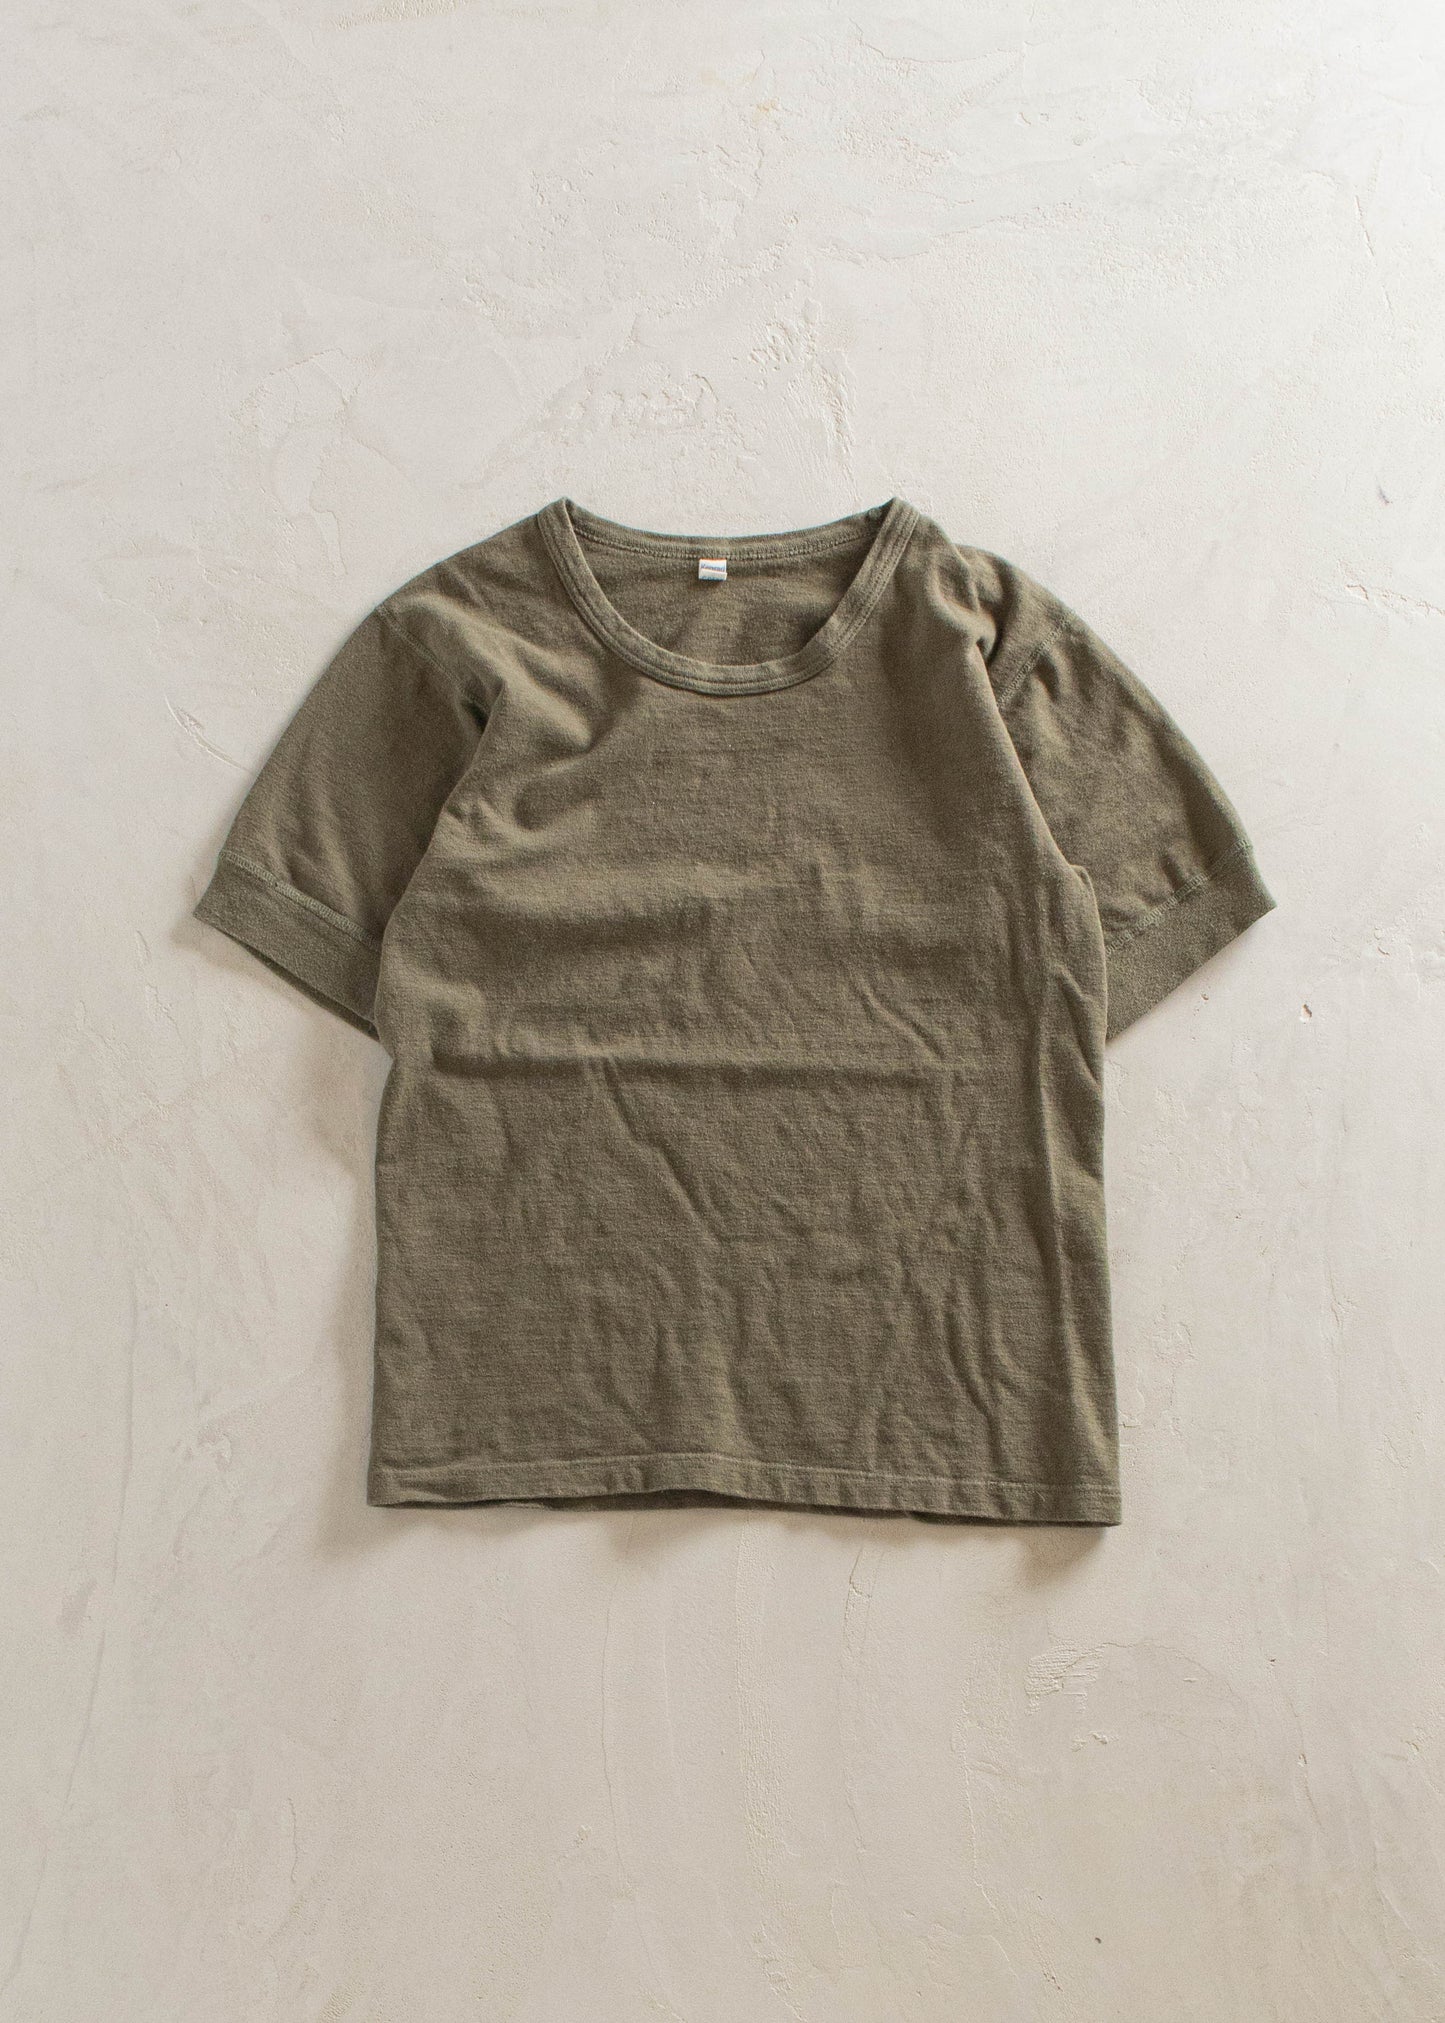 1980s Military T-Shirt Size XS/S